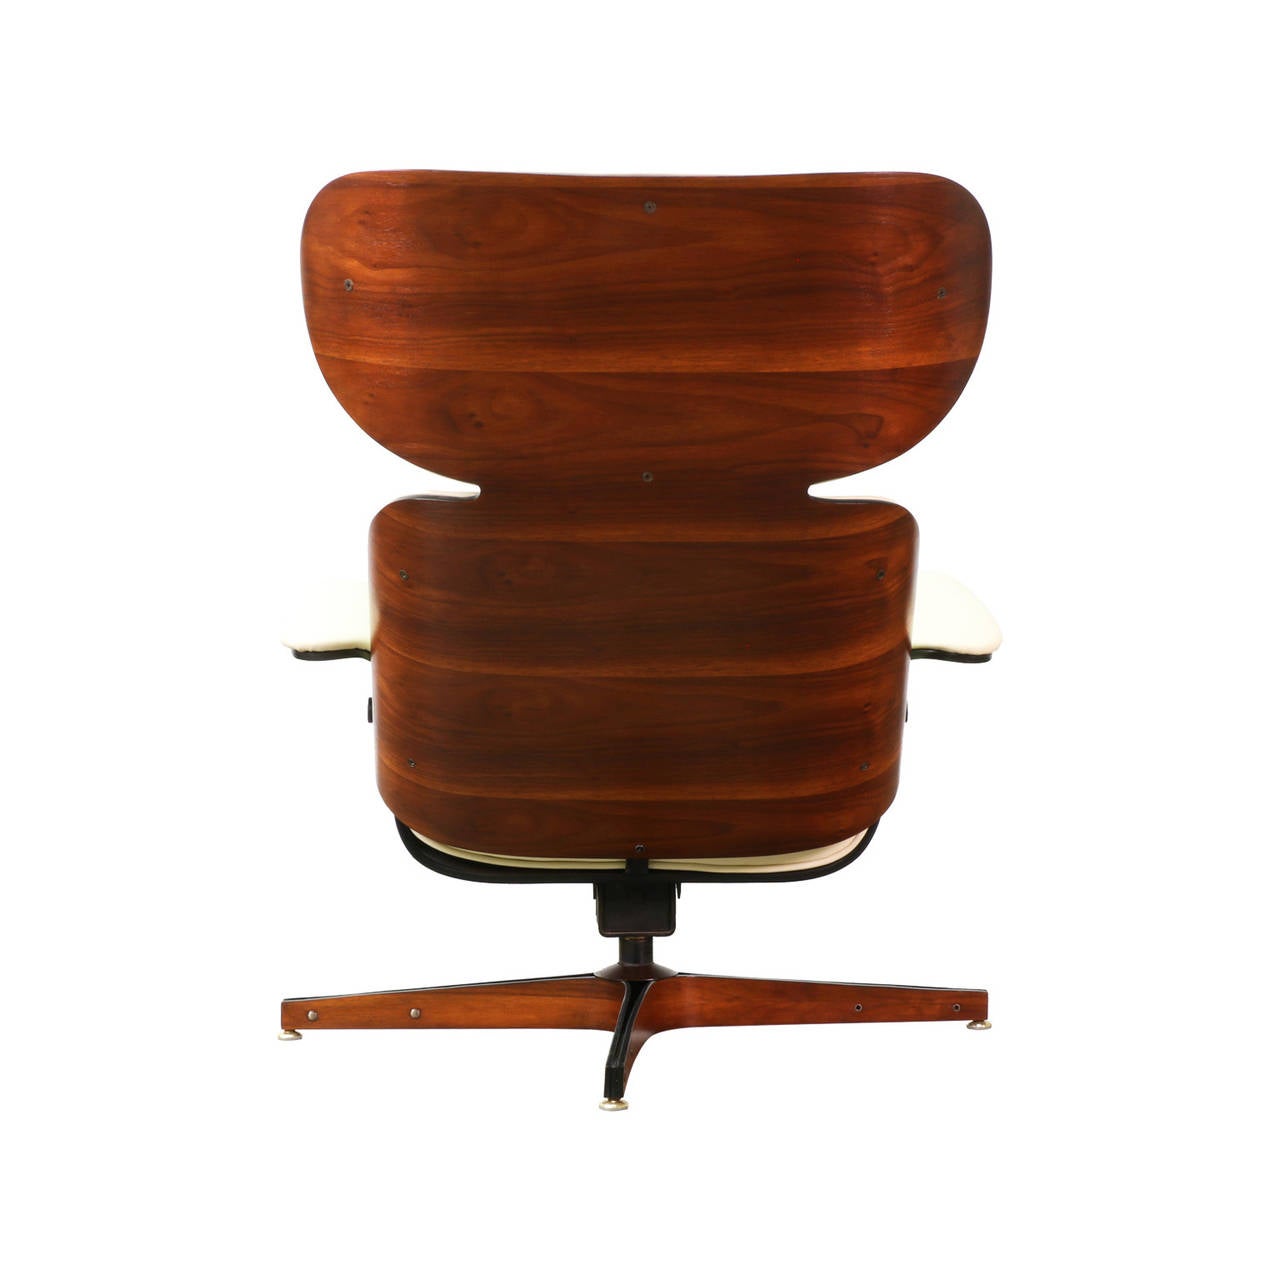 American George Mulhauser’s “Mr. Chair” with Ottoman for Plycraft